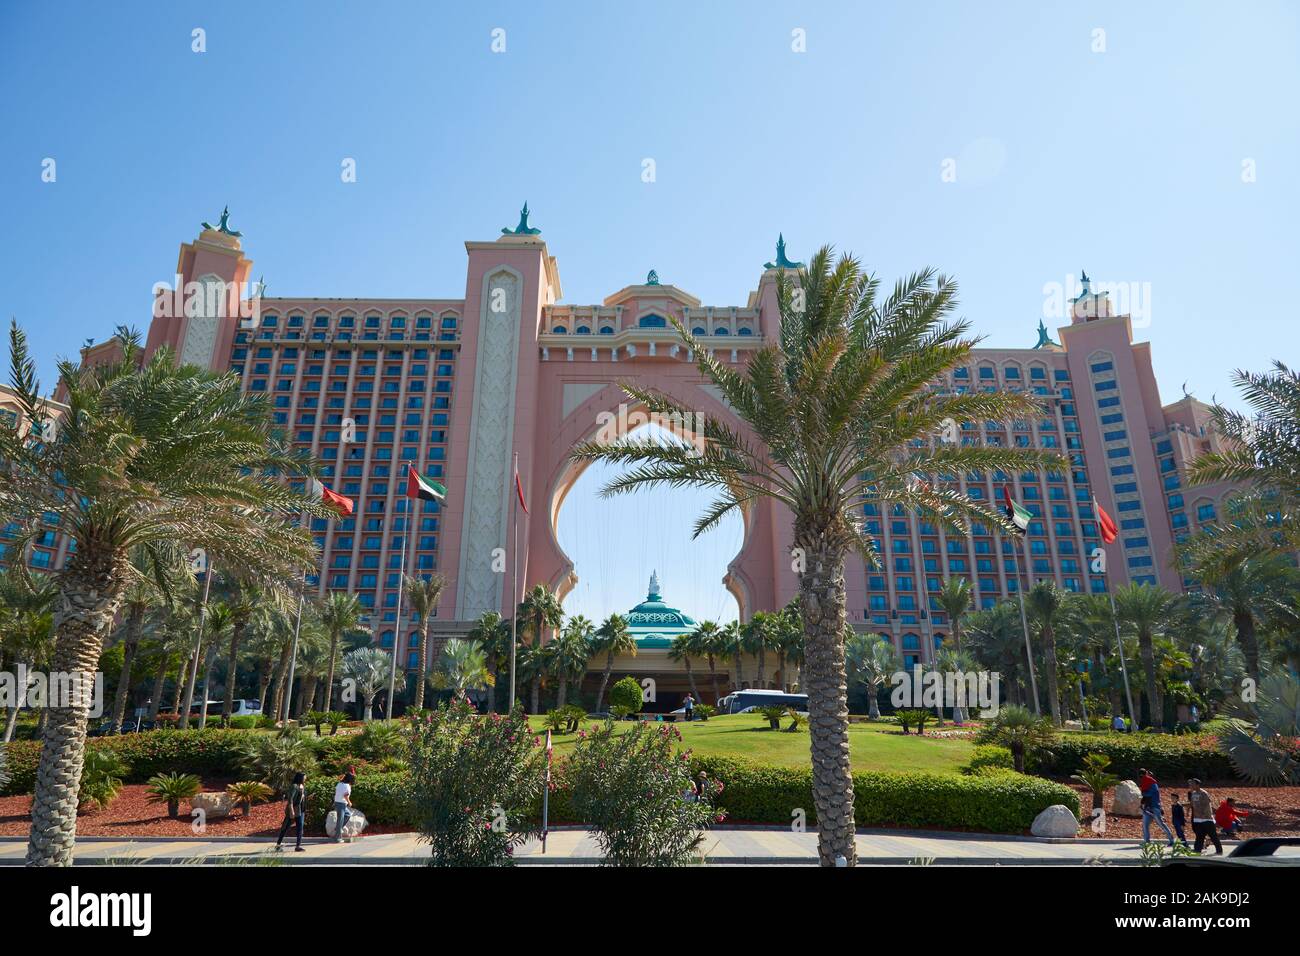 DUBAI, UNITED ARAB EMIRATES - NOVEMBER 22, 2019: Atlantis The Palm luxury hotel with garden, people and tourists in a sunny day Stock Photo